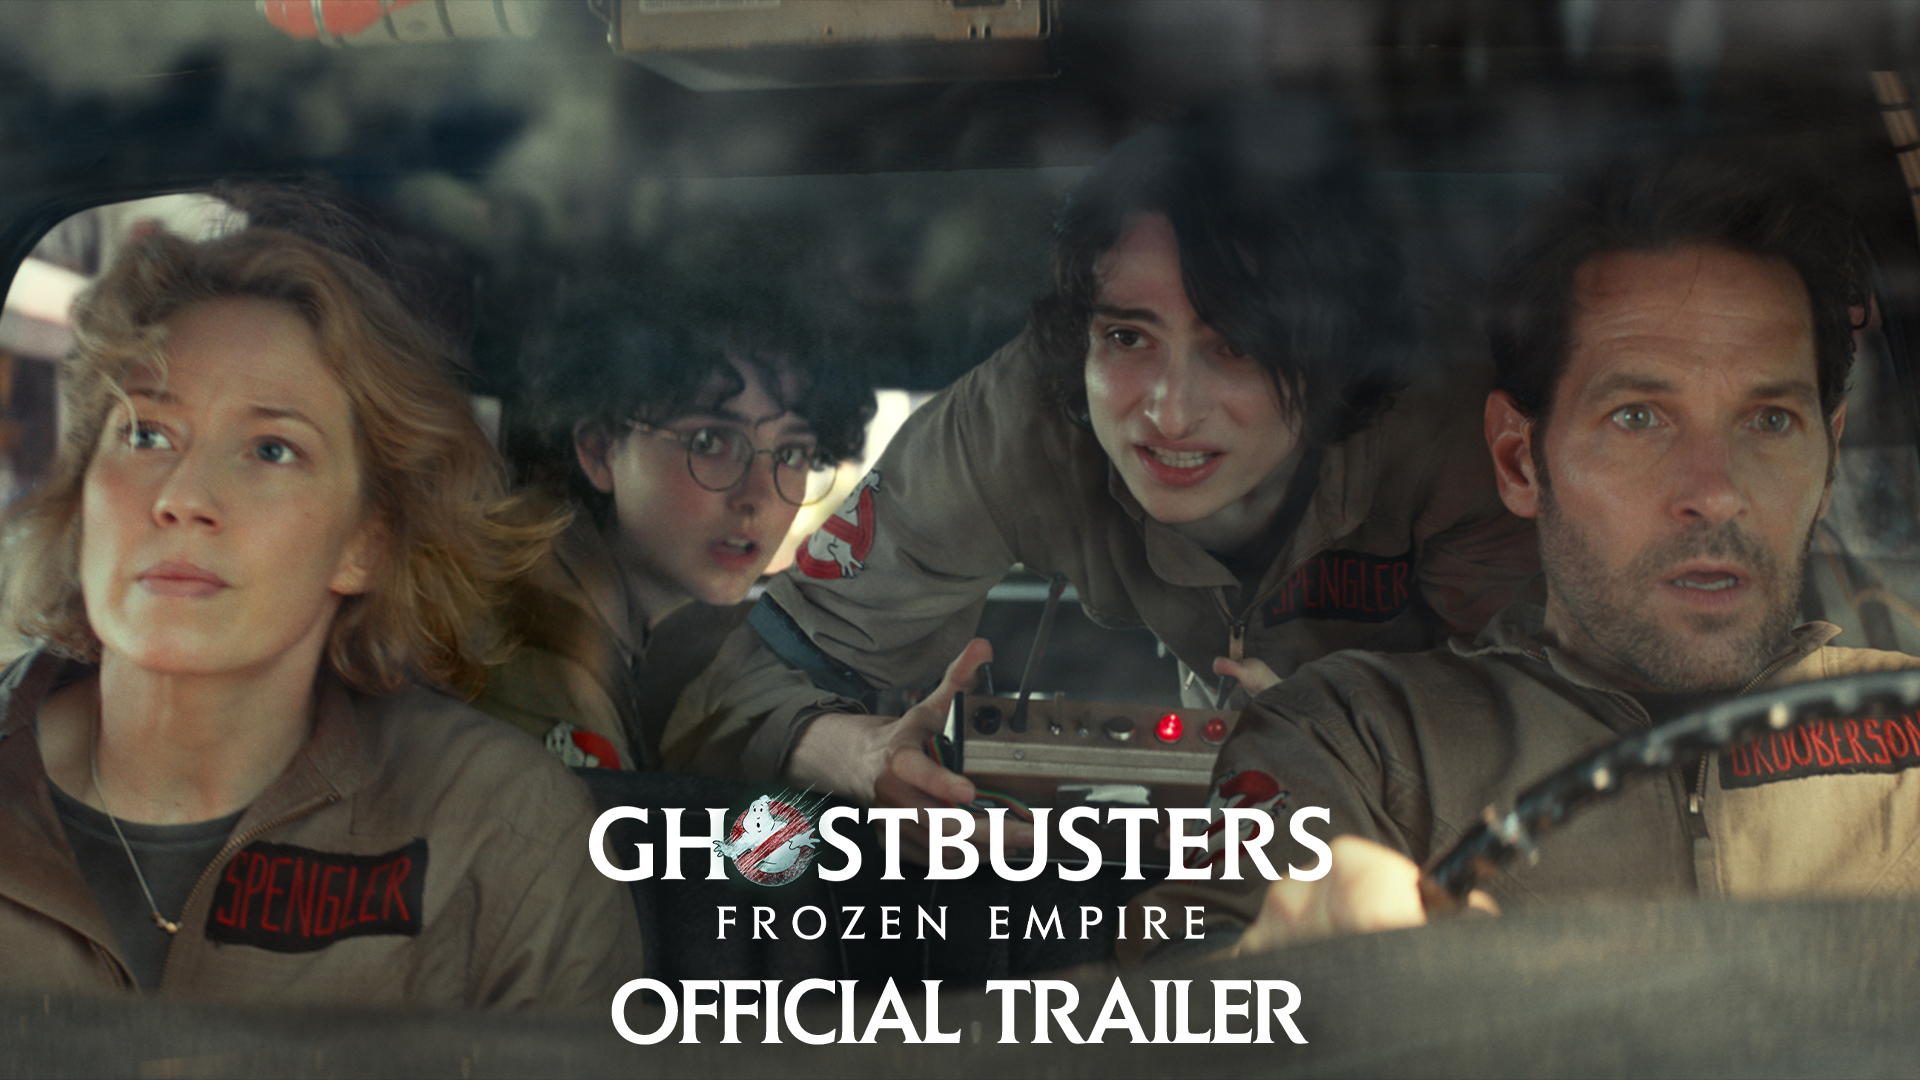 Ghostbusters Frozen Empire Official Trailer